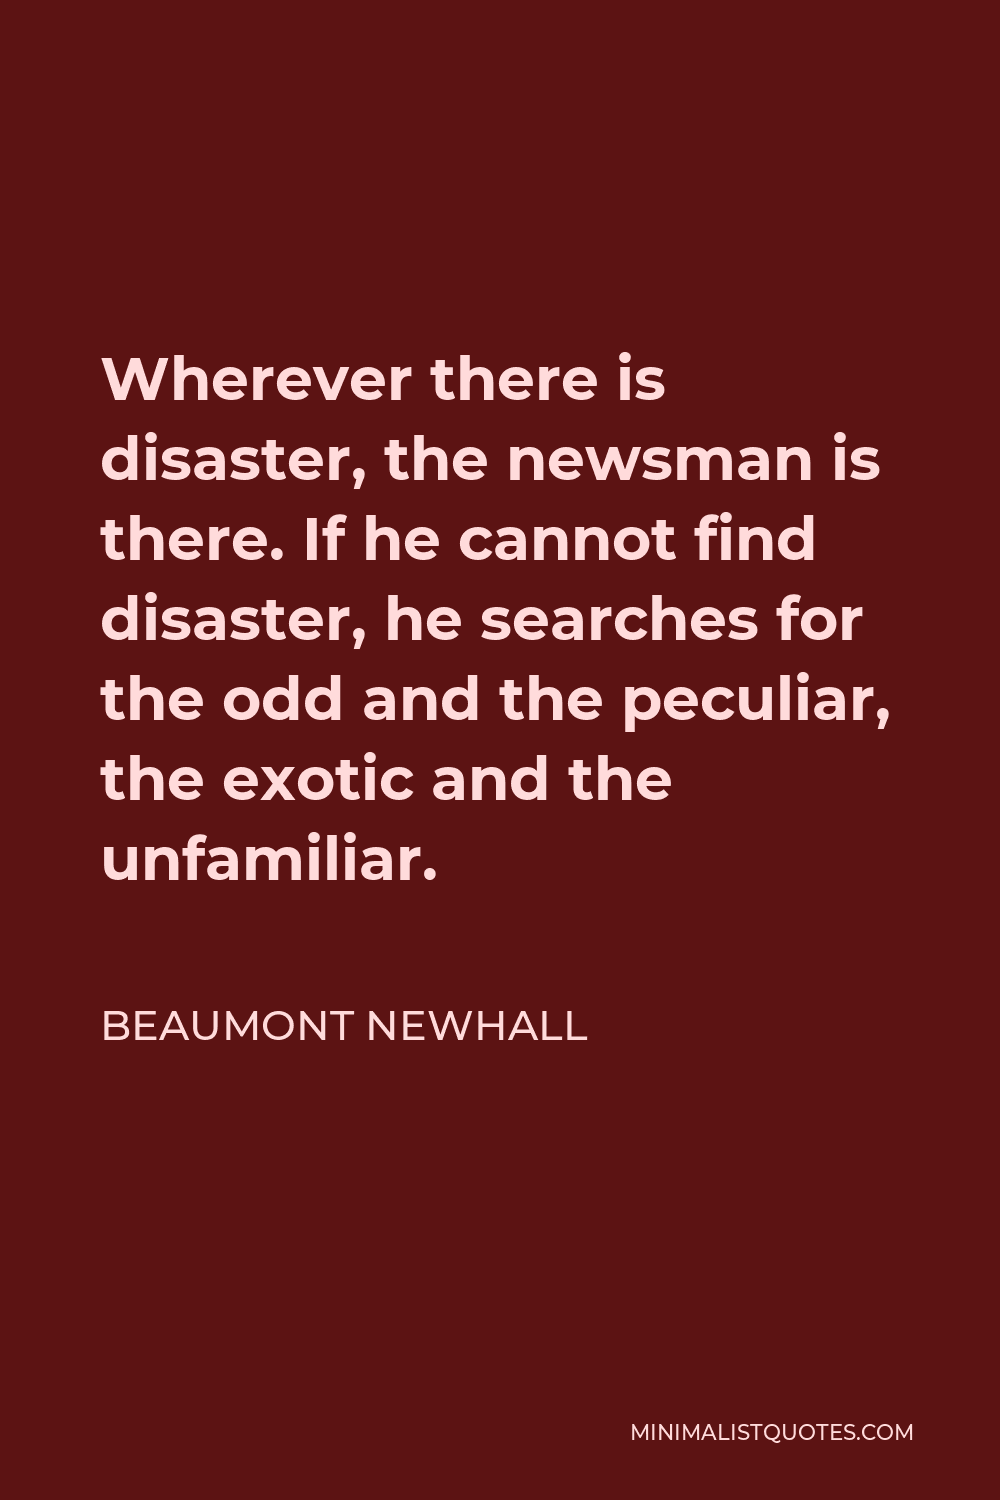 Beaumont Newhall Quote - Wherever there is disaster, the newsman is there. If he cannot find disaster, he searches for the odd and the peculiar, the exotic and the unfamiliar.